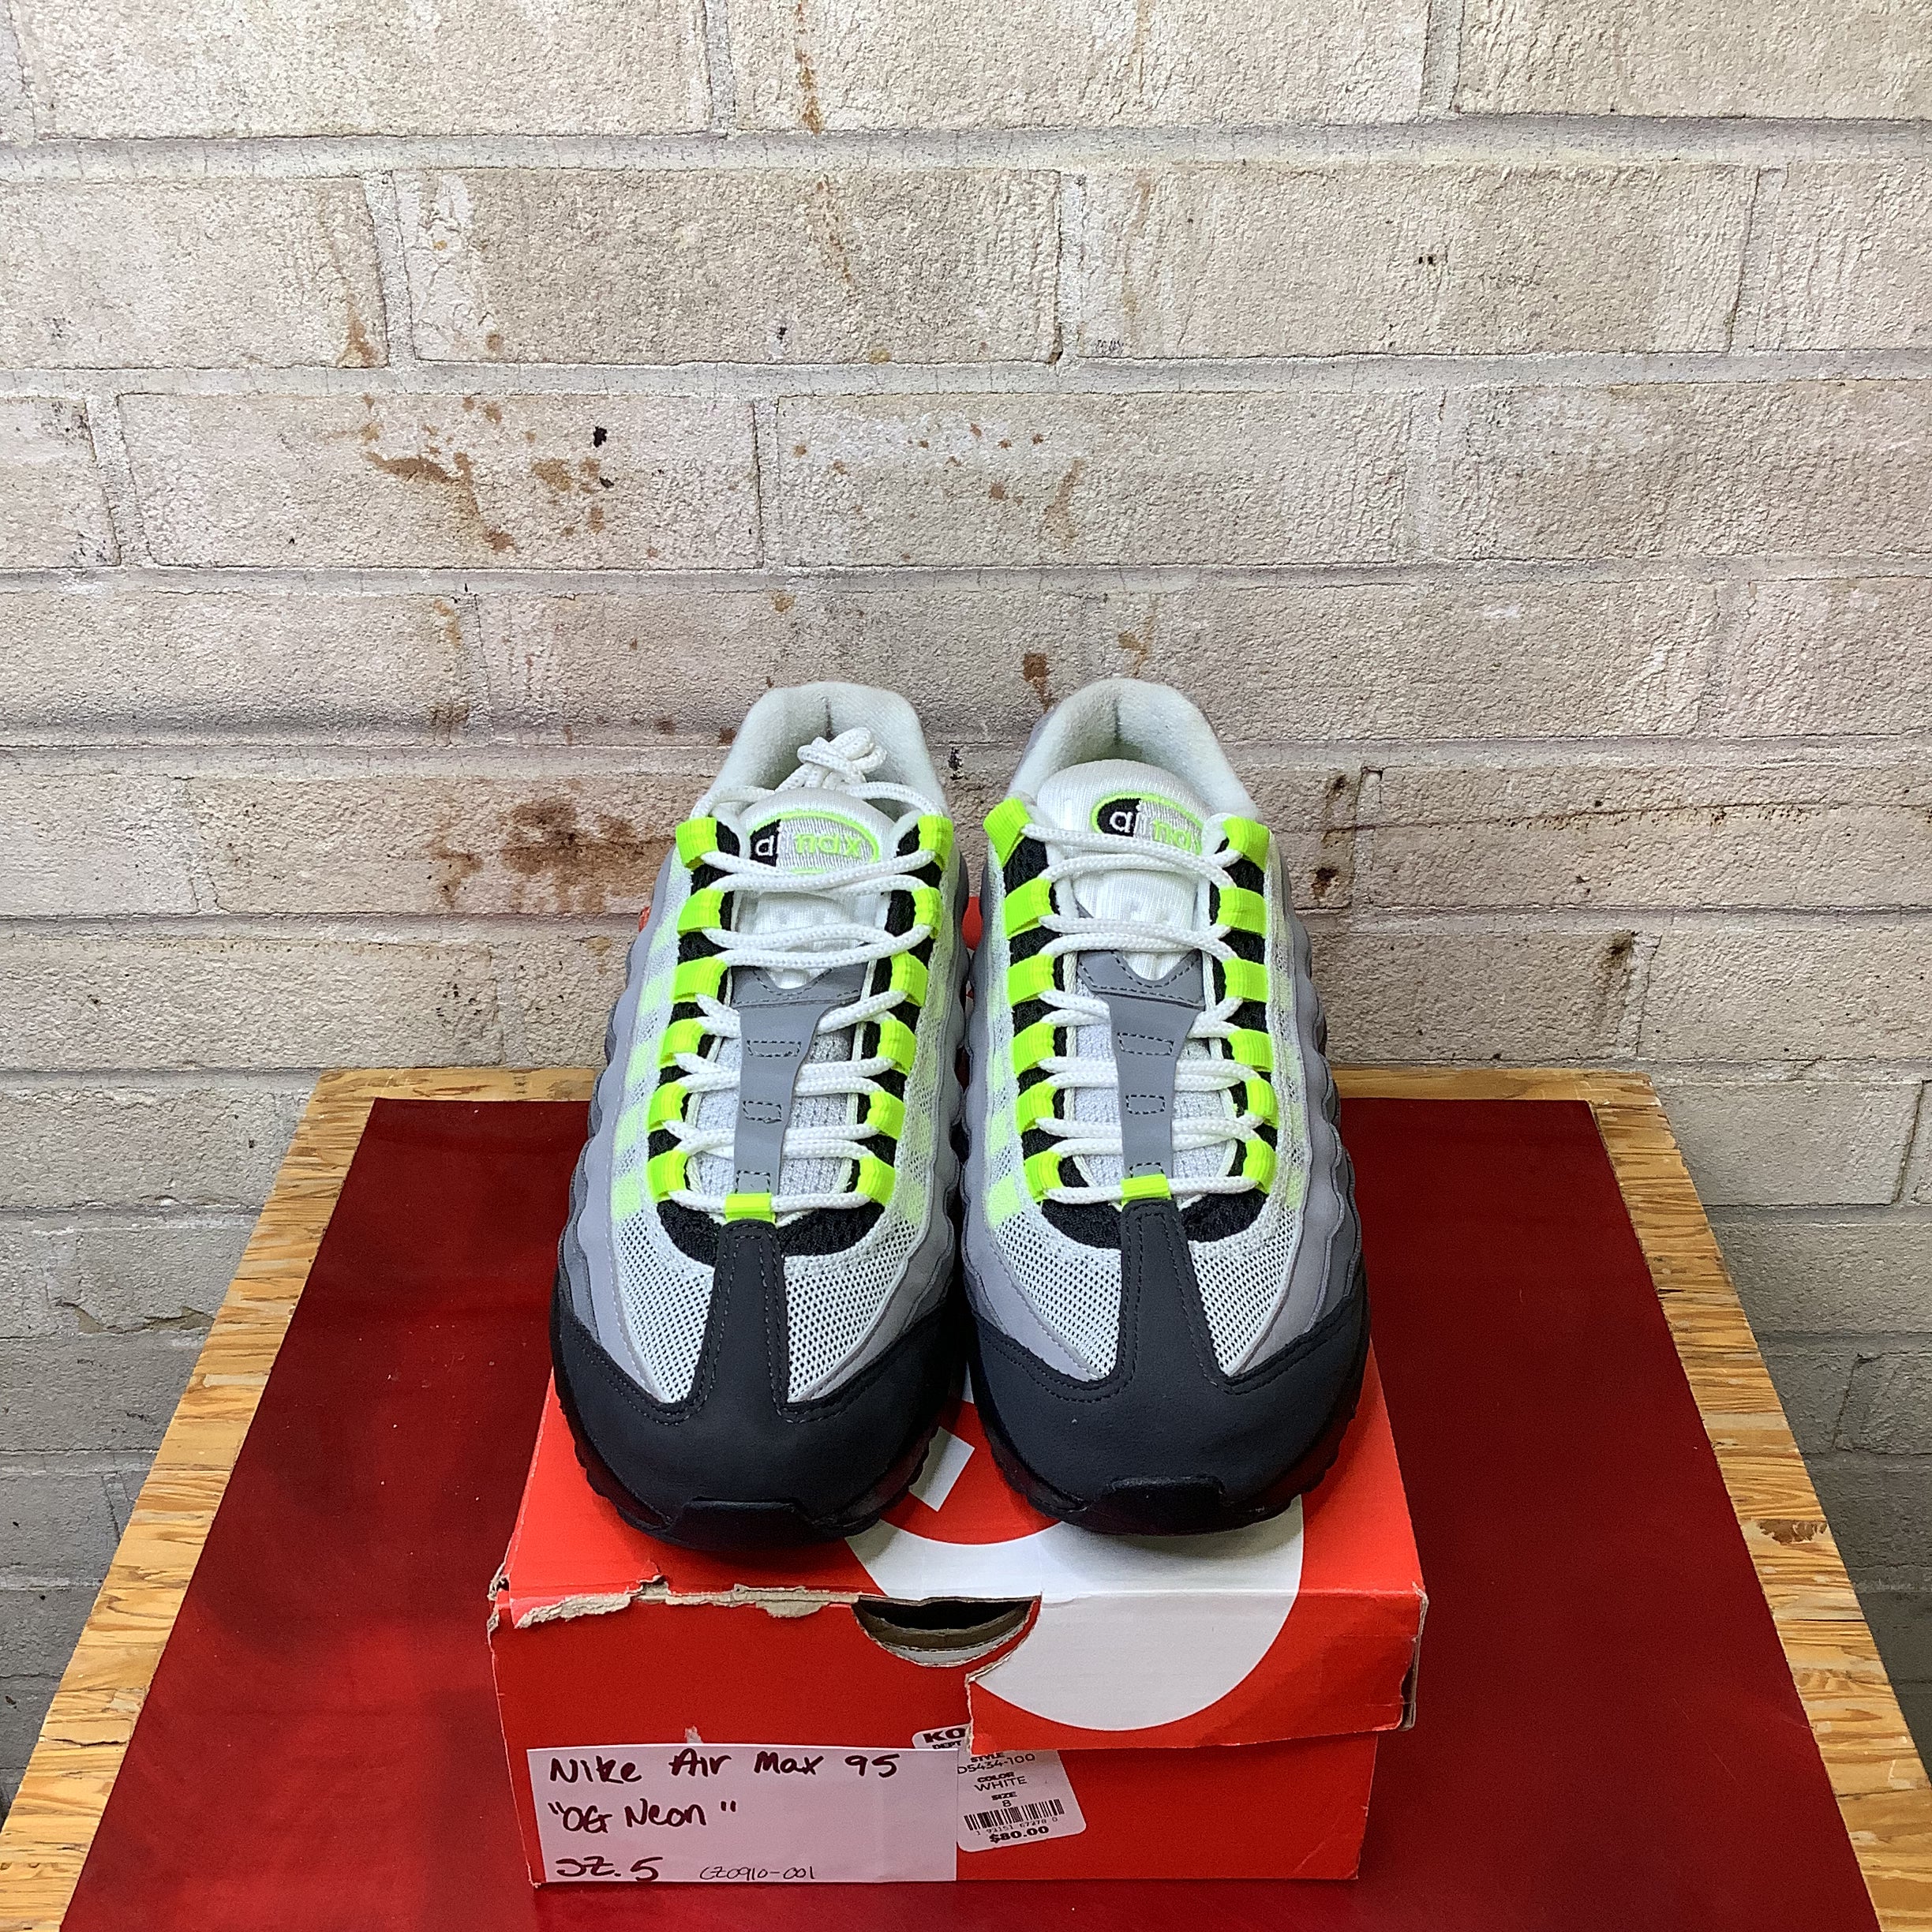 NIKE AIR MAX 95 OG NEON SIZE 5Y CZ0910-001